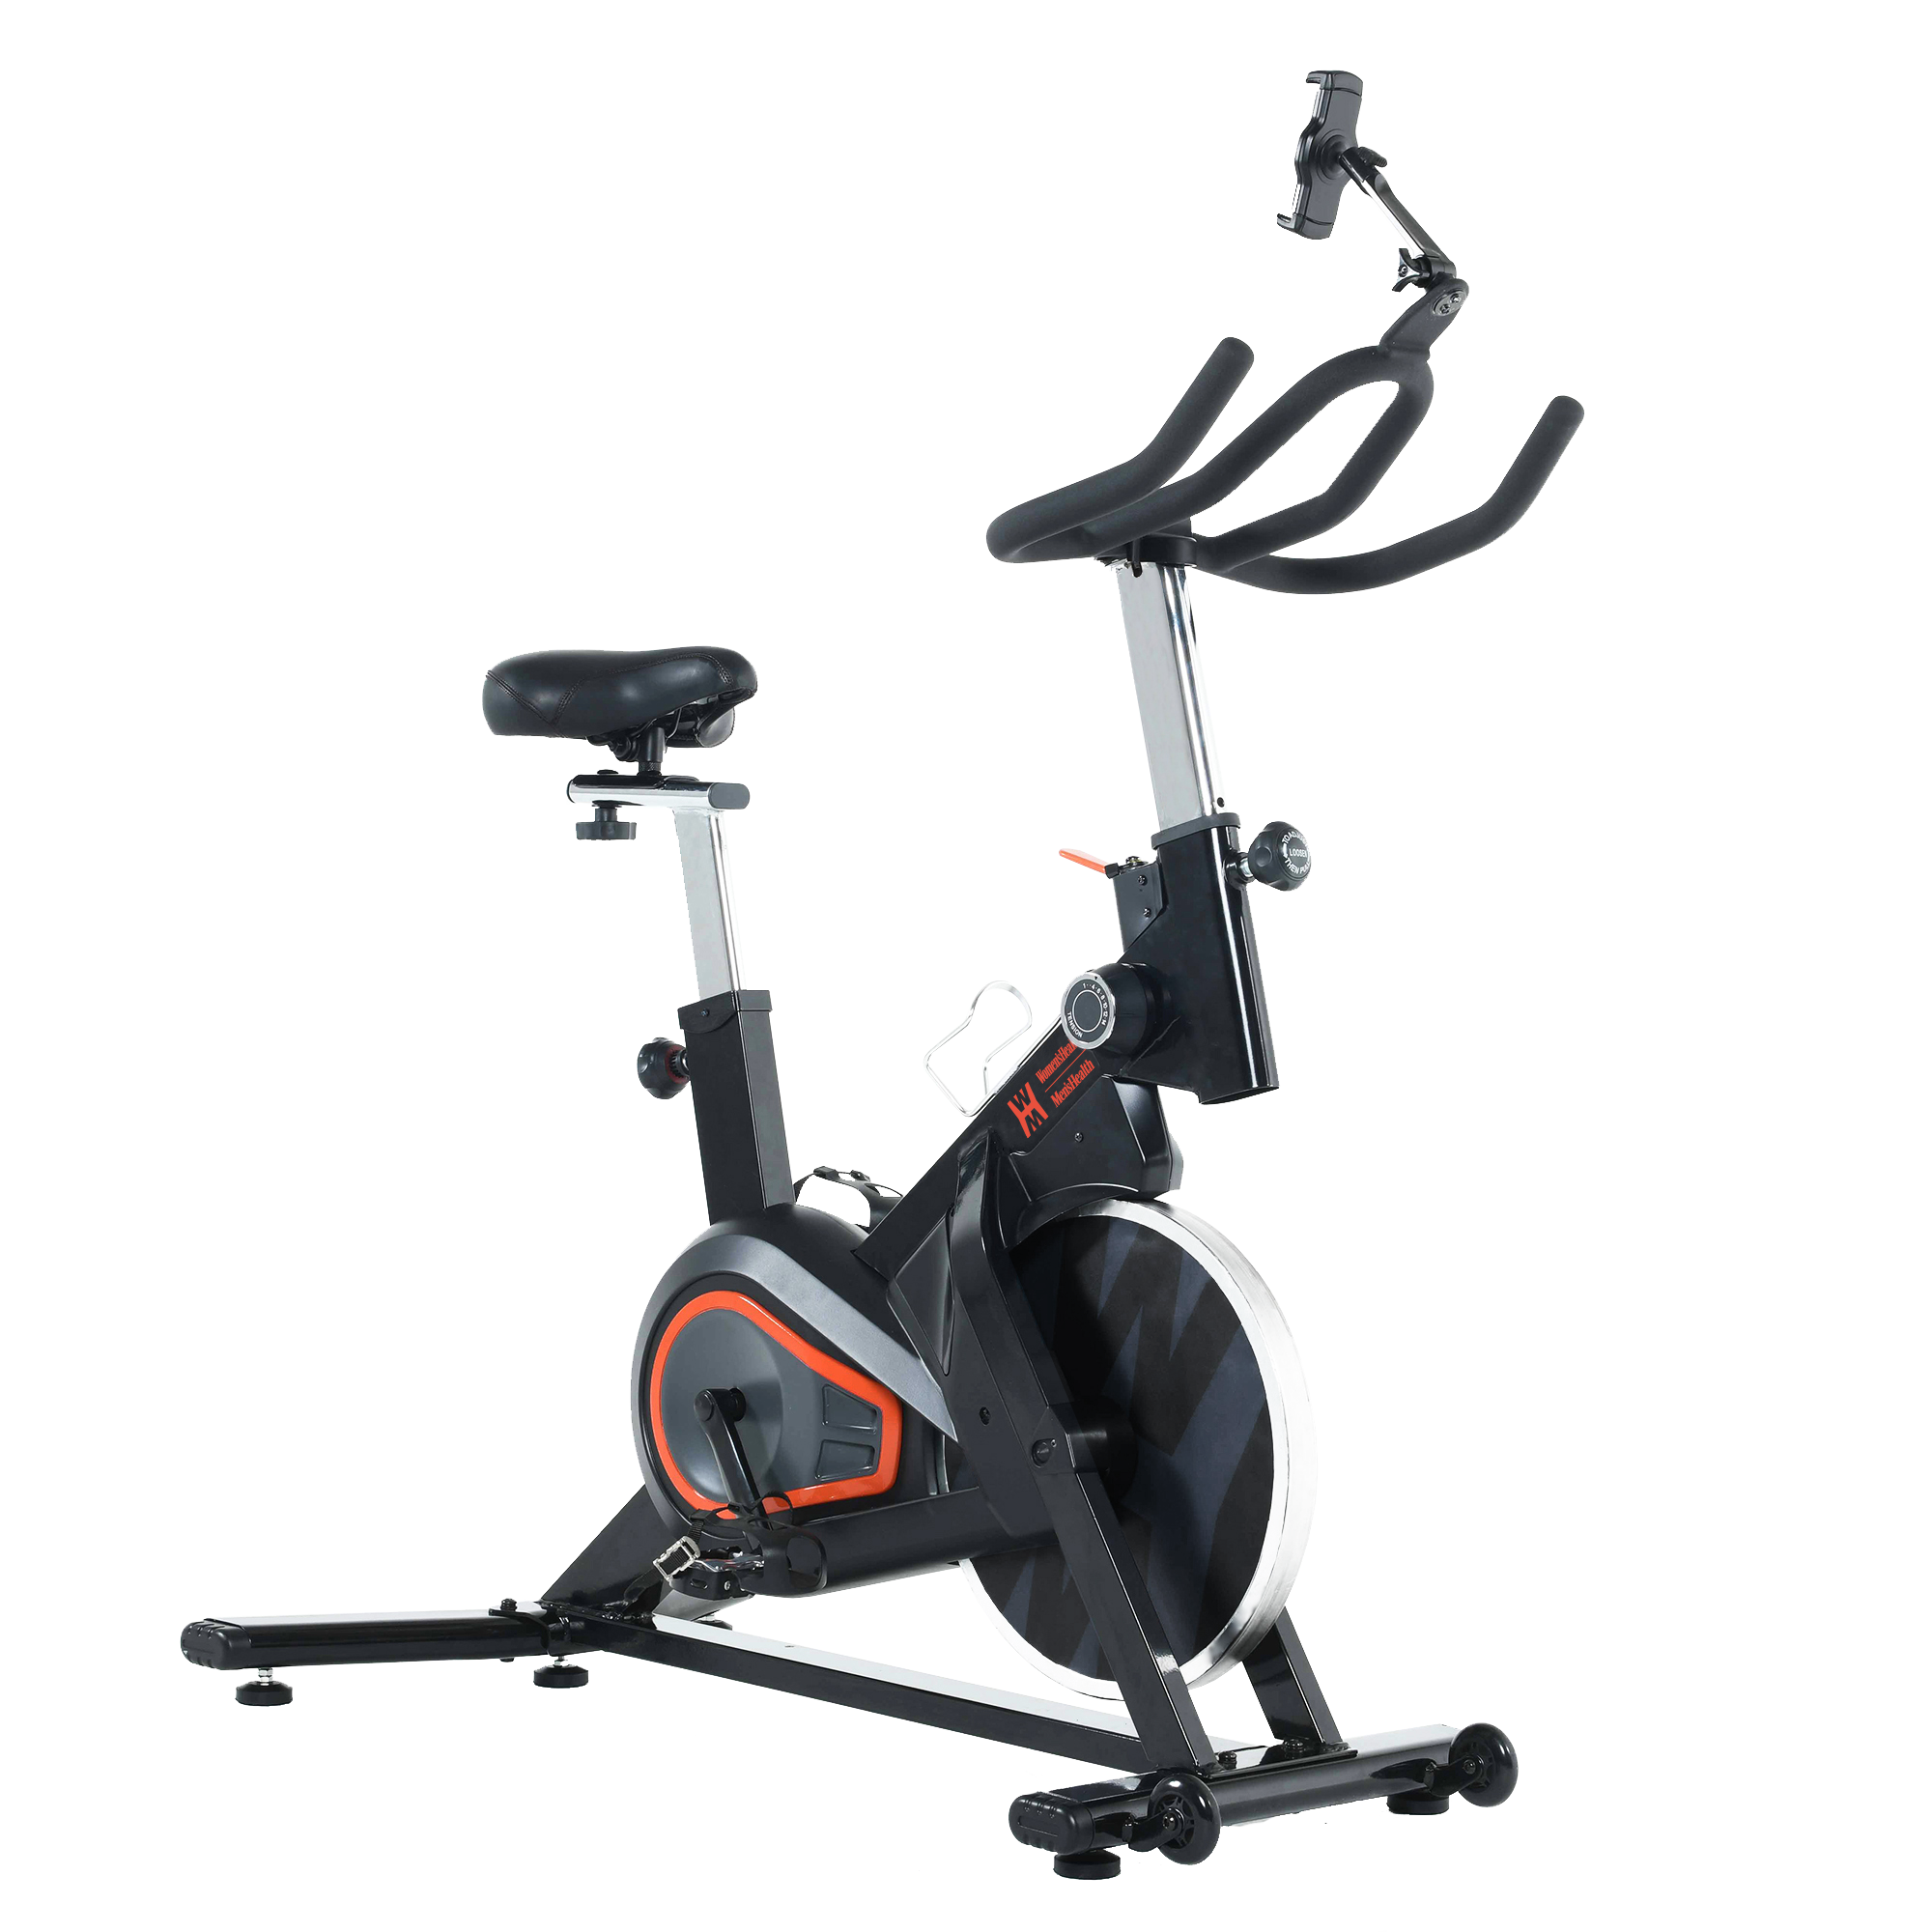 Indoor Spinning Bike with Multi-function Display Fitness Equi Exercise Bicycle 